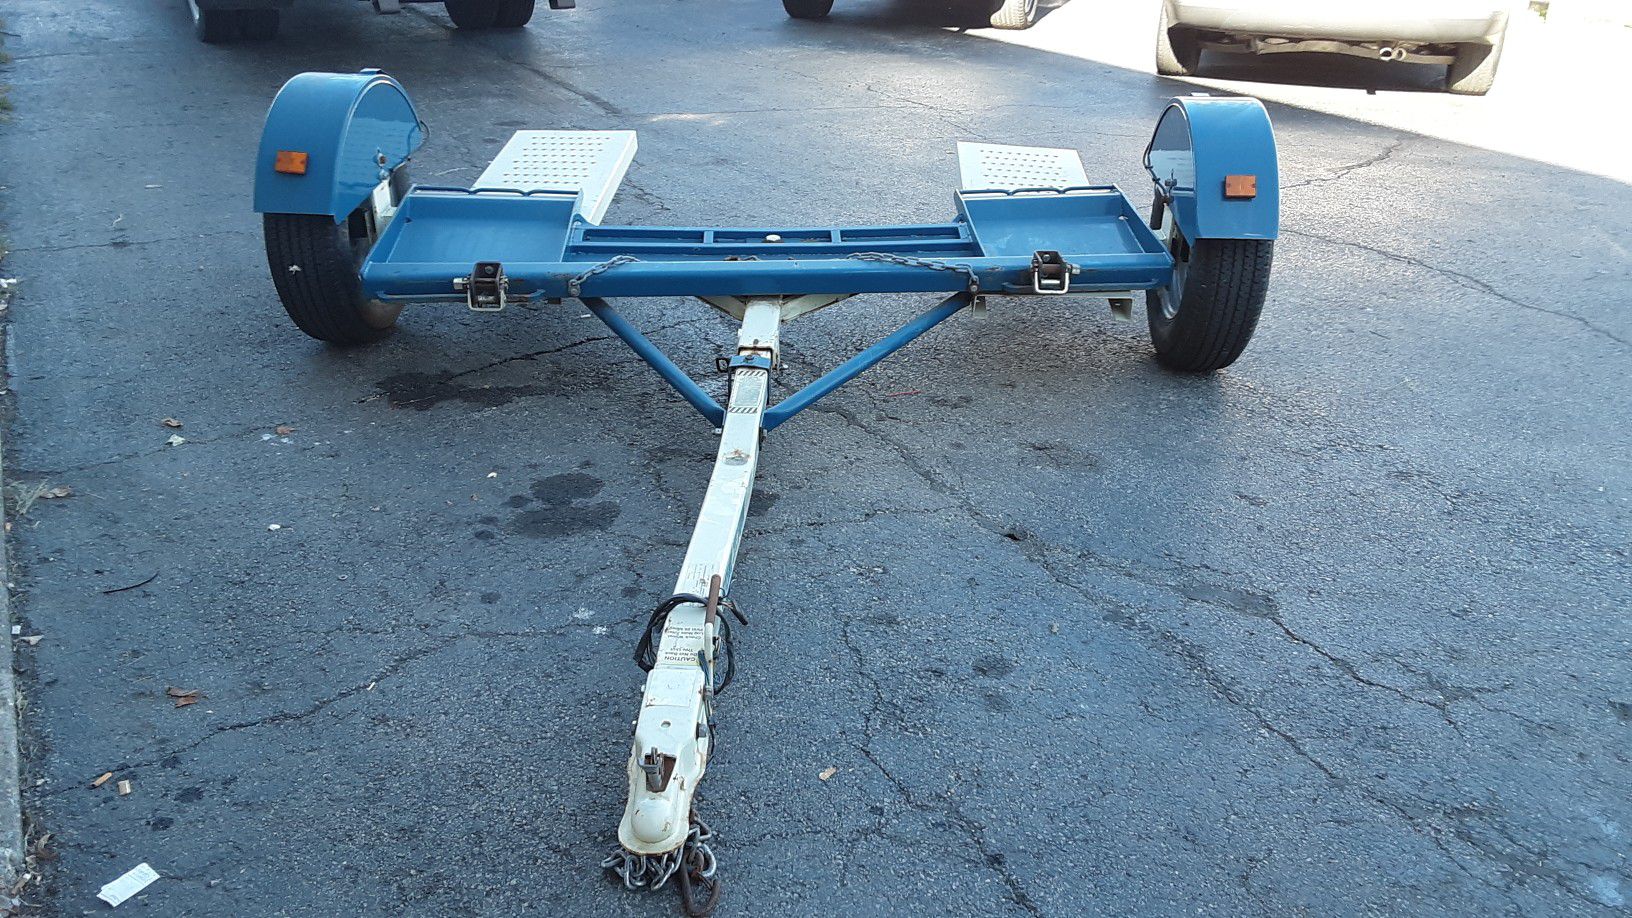 Stehl tow dolly